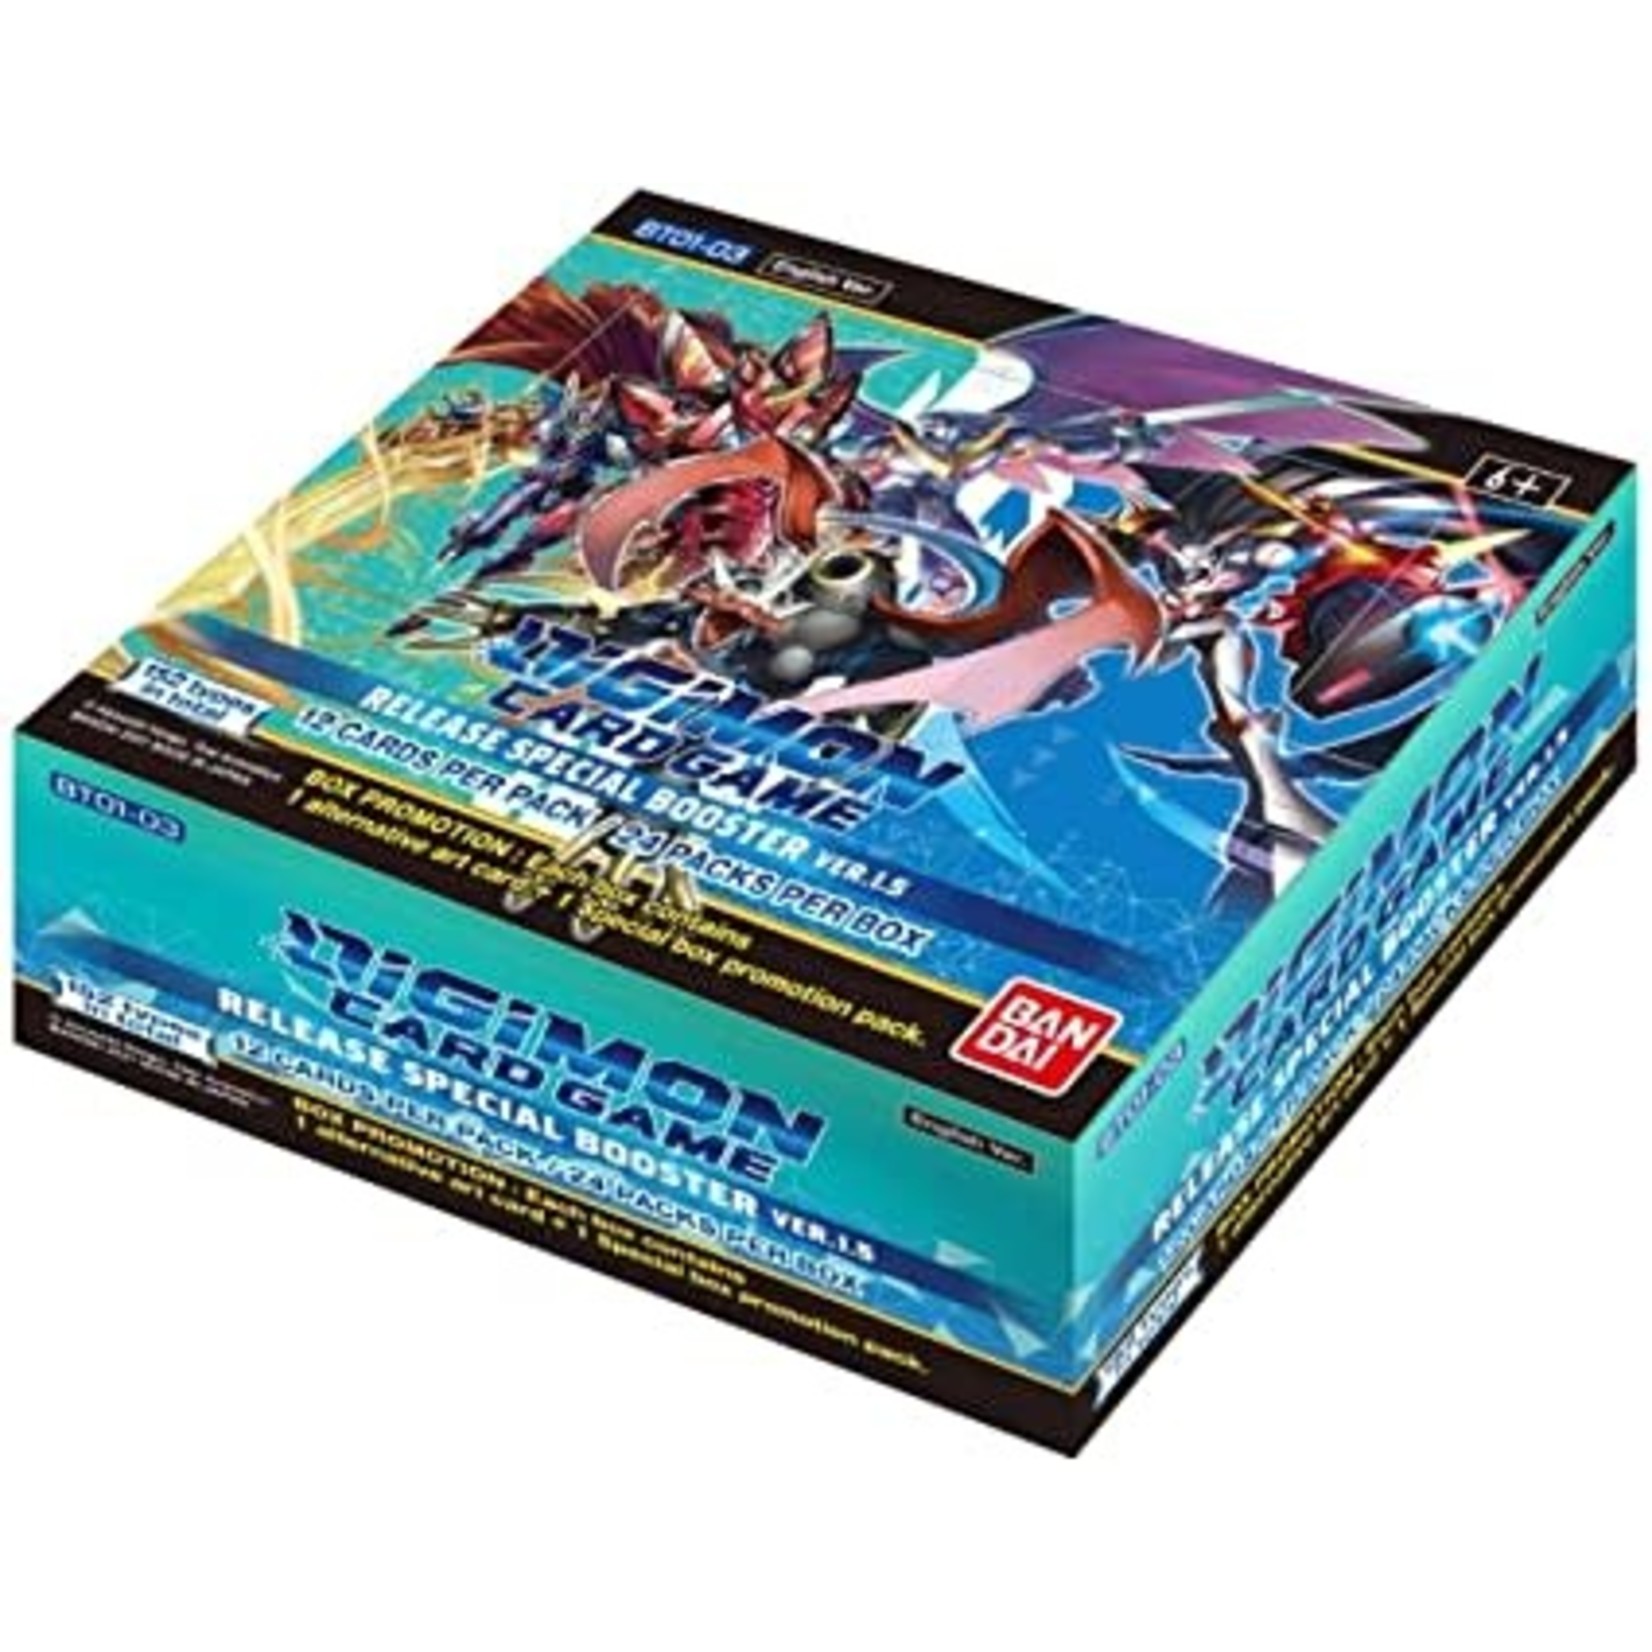 Bandai Digimon Card Game Release Special Booster 1.5